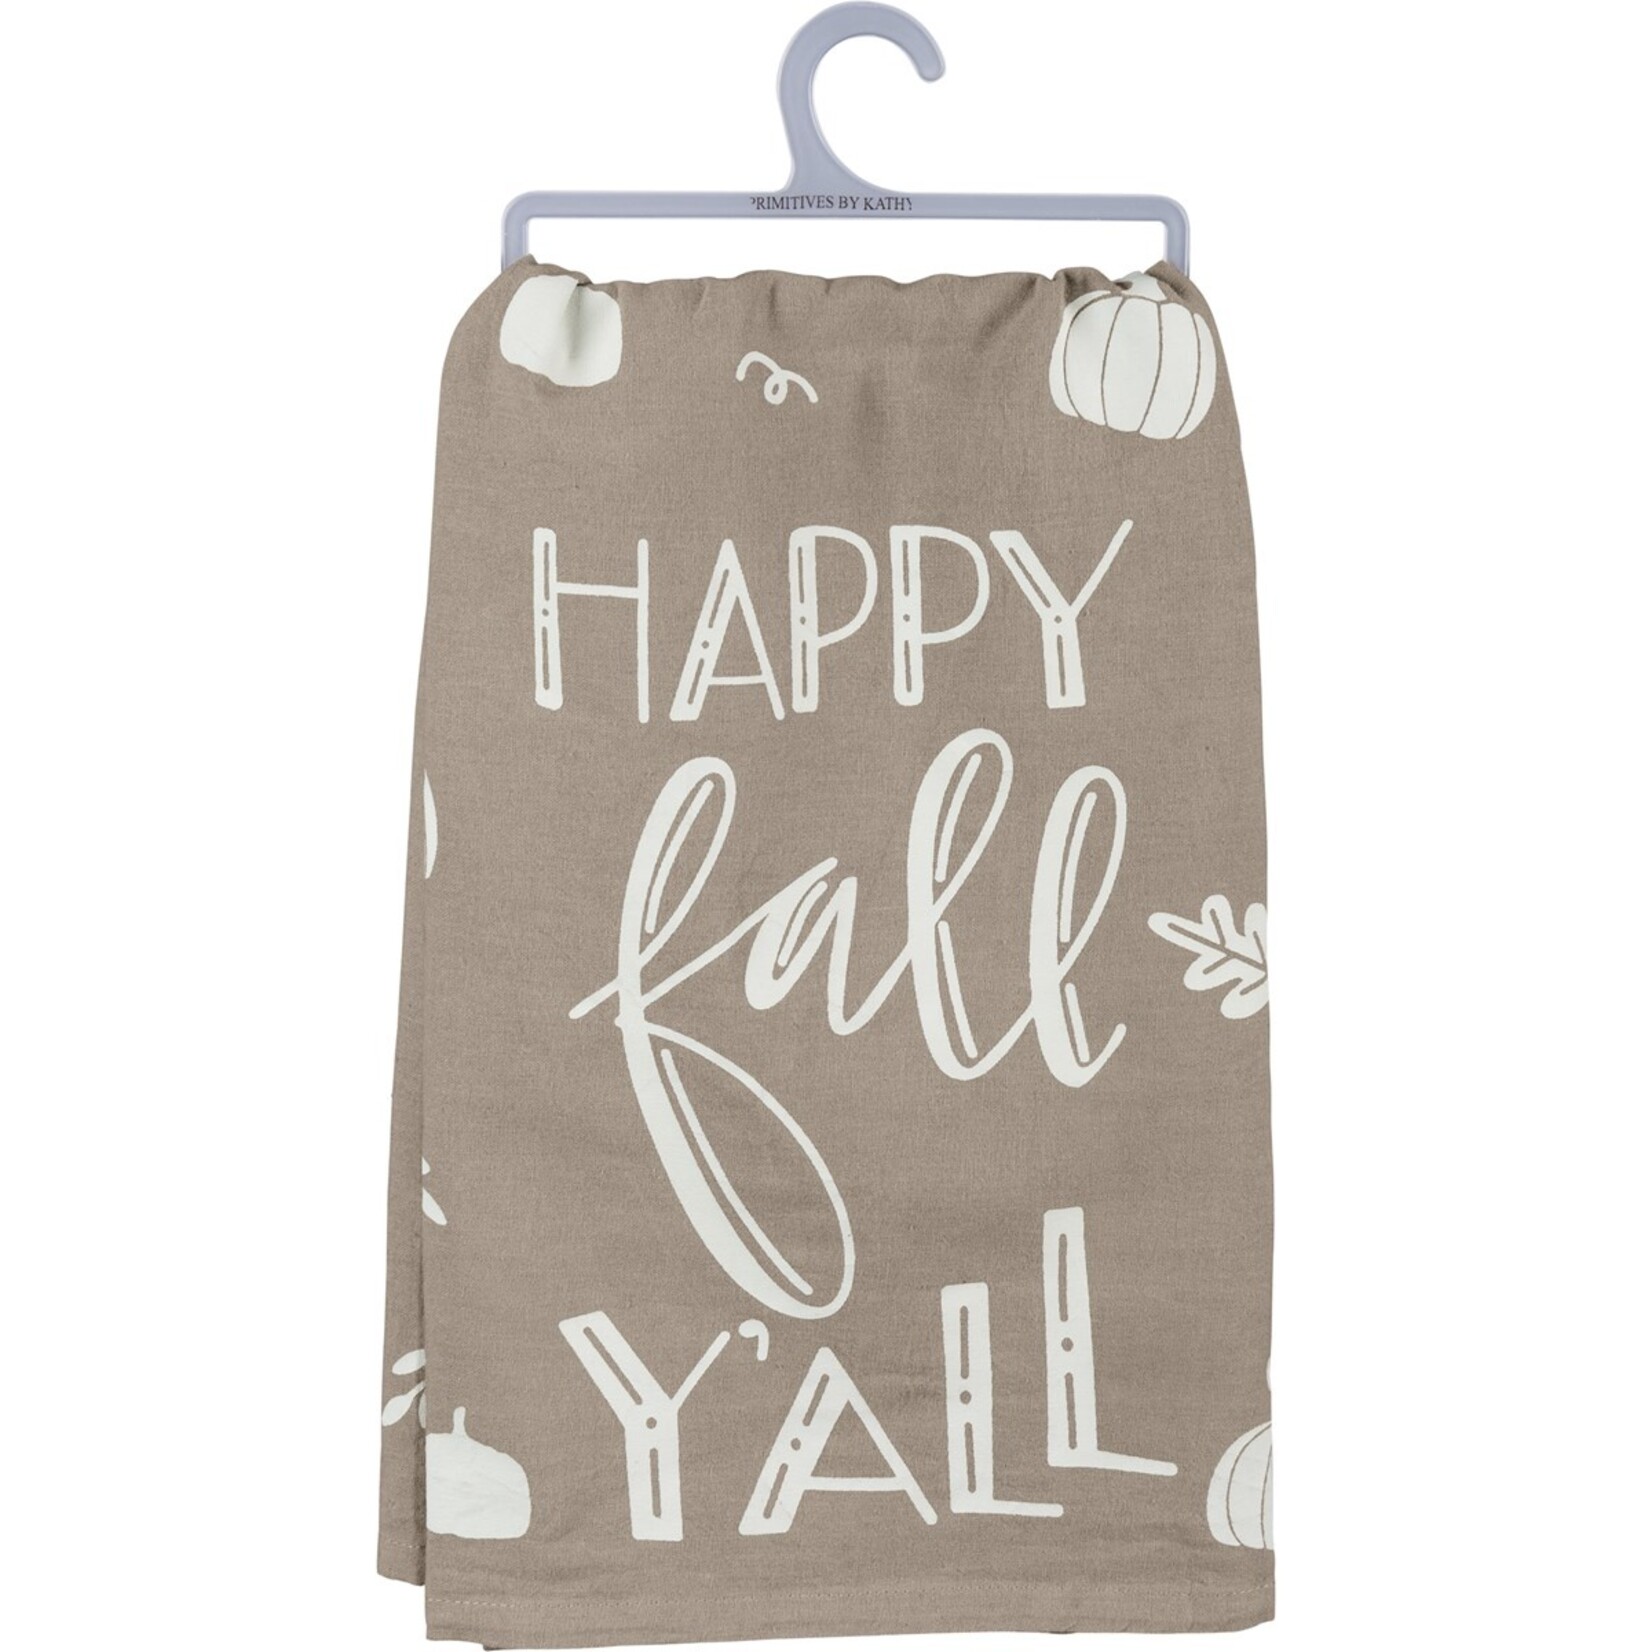 Primitives by Kathy Primitives by Kathy Happy Fall Y'all Dish Towel